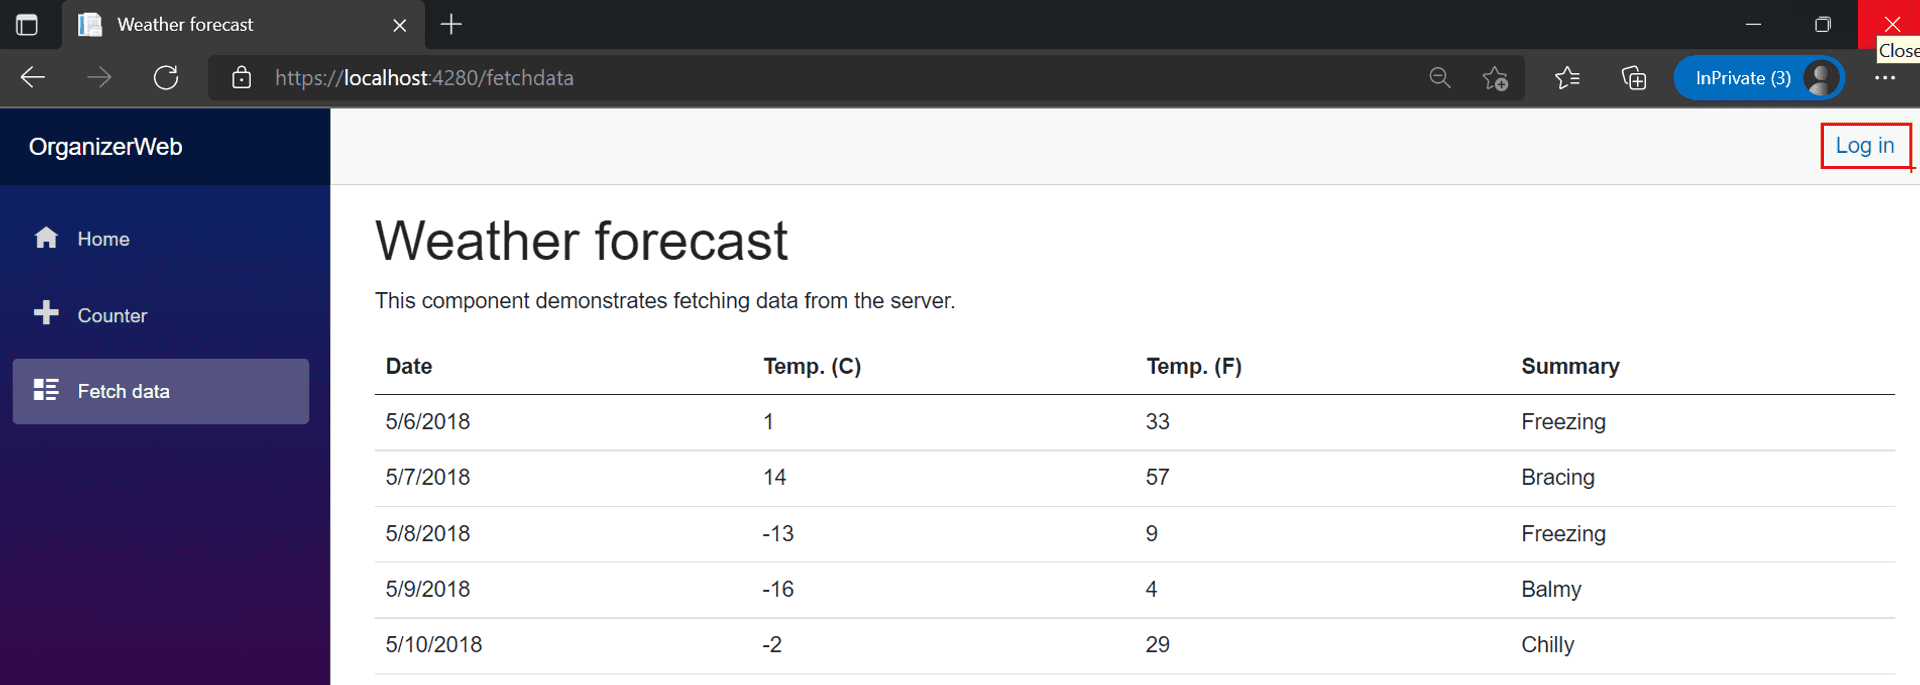 Weather Forecast page with the Login